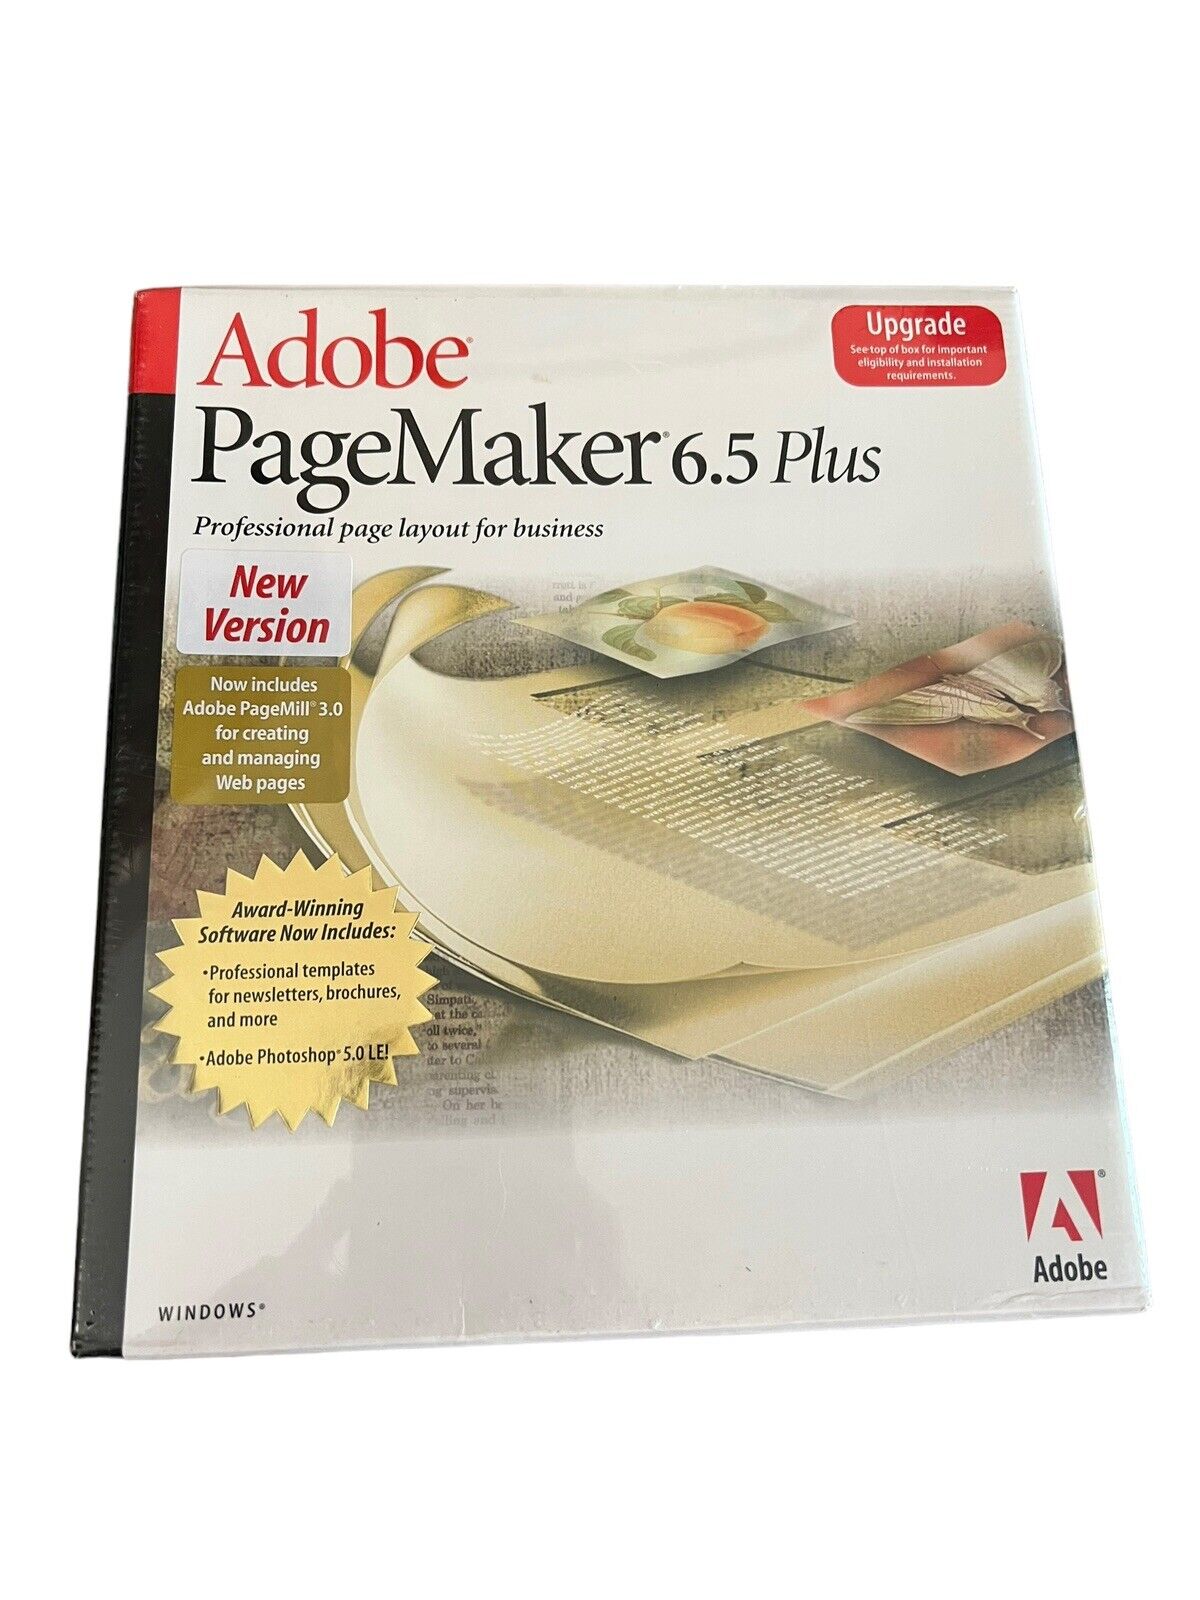 VTG Adobe PageMaker 6.5 Plus for Windows Professional Page Layout For Business